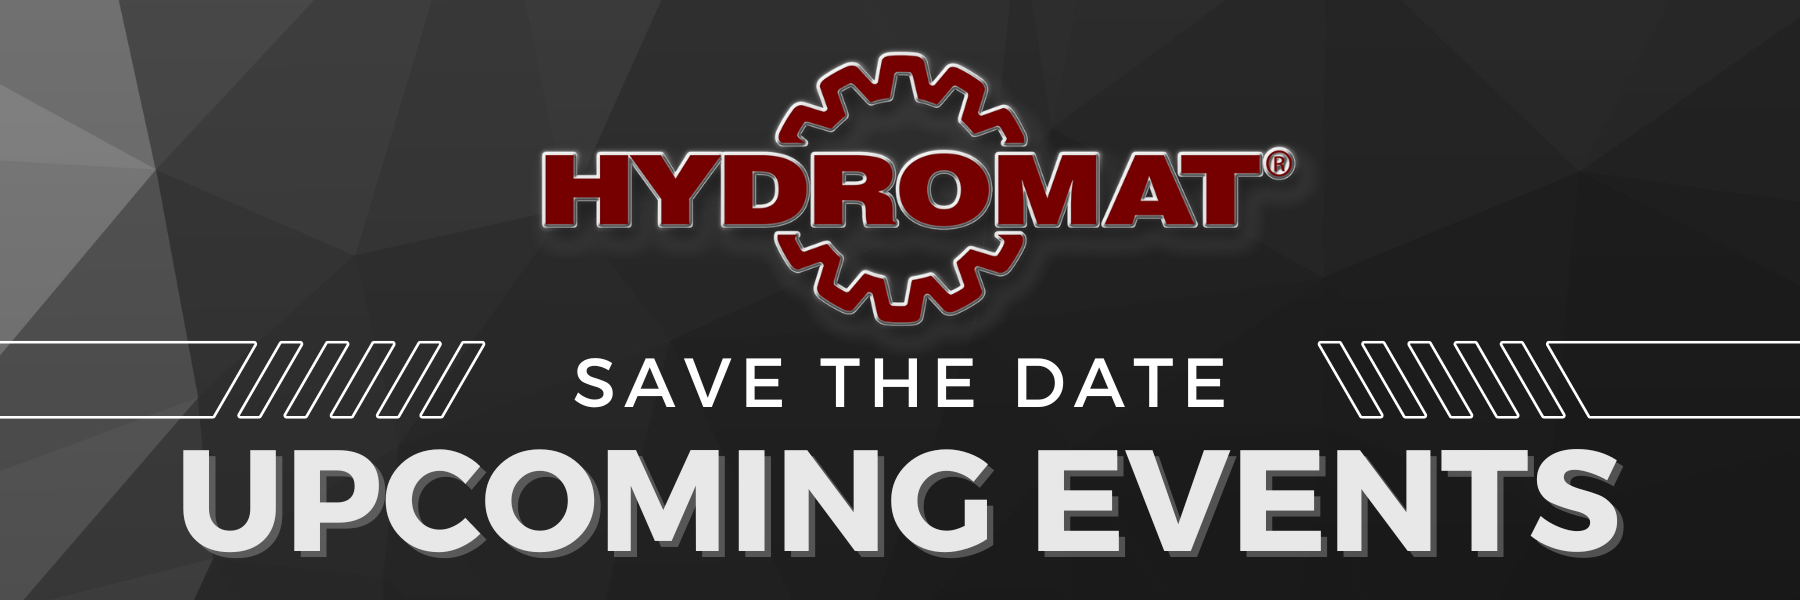 Save the Date | Upcoming Hydromat Events